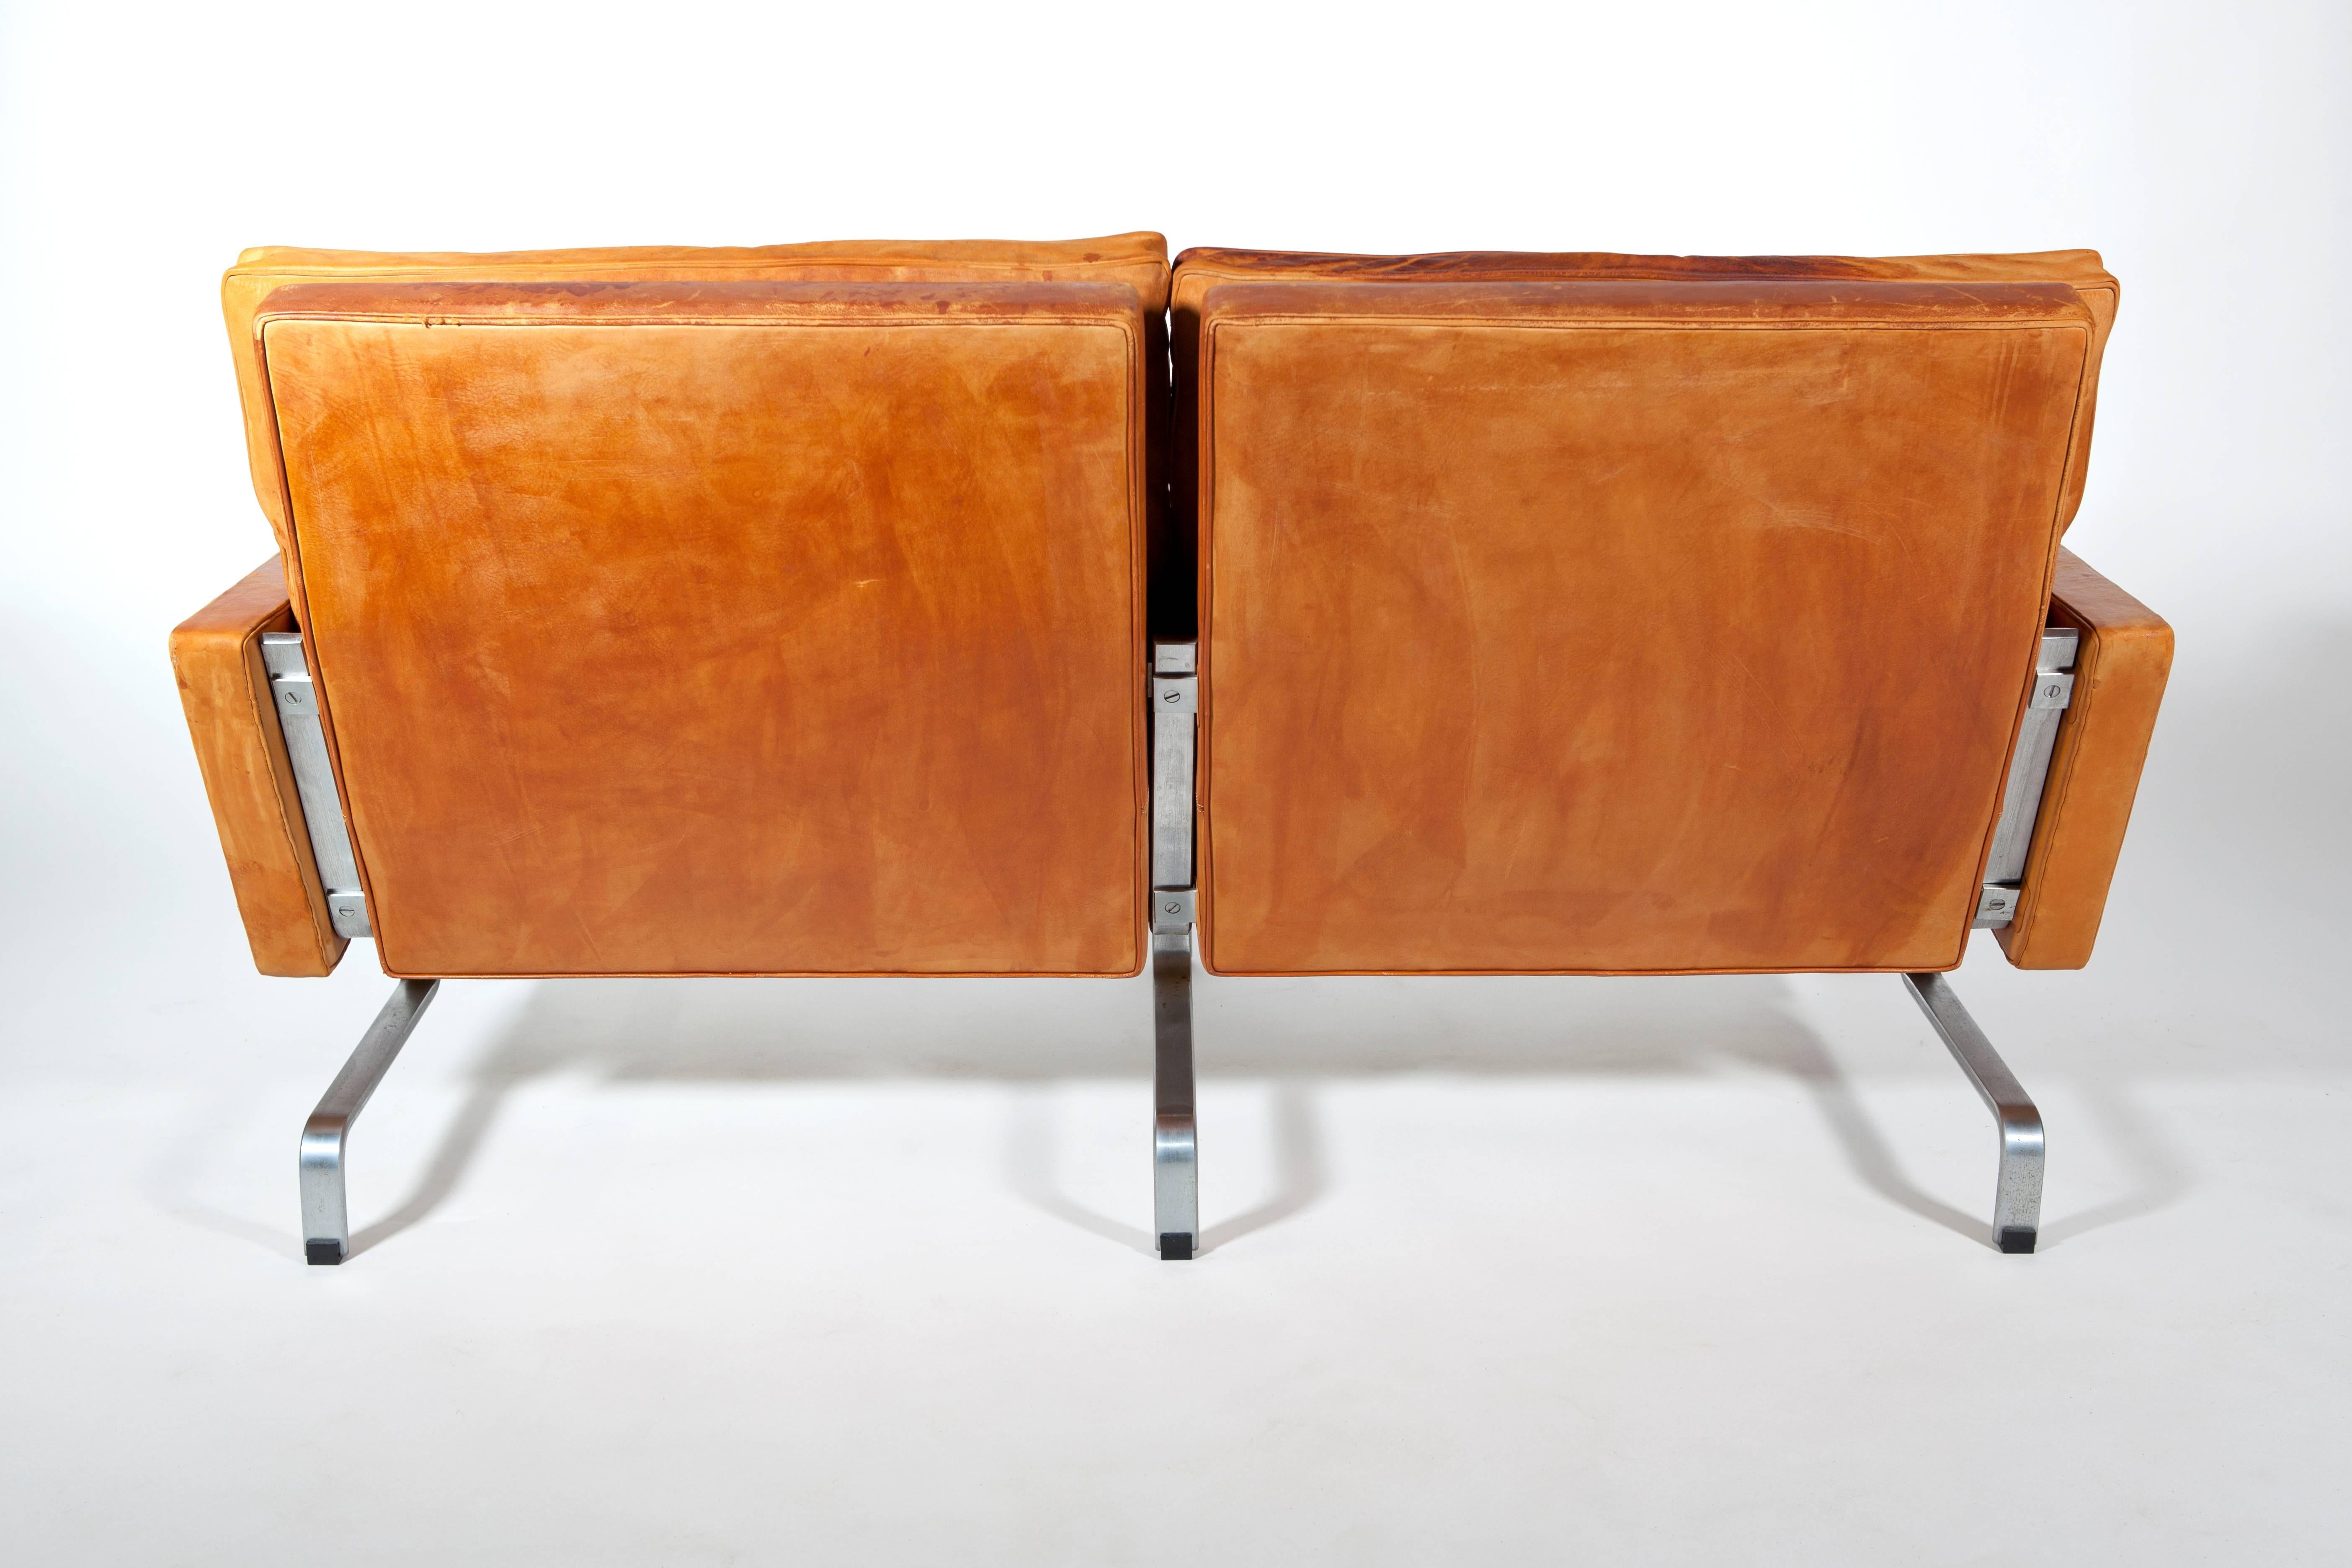 Mid-20th Century Poul Kjaerholm, Leather Sofa, Executed by E. Kold Christensen, circa 1958 For Sale